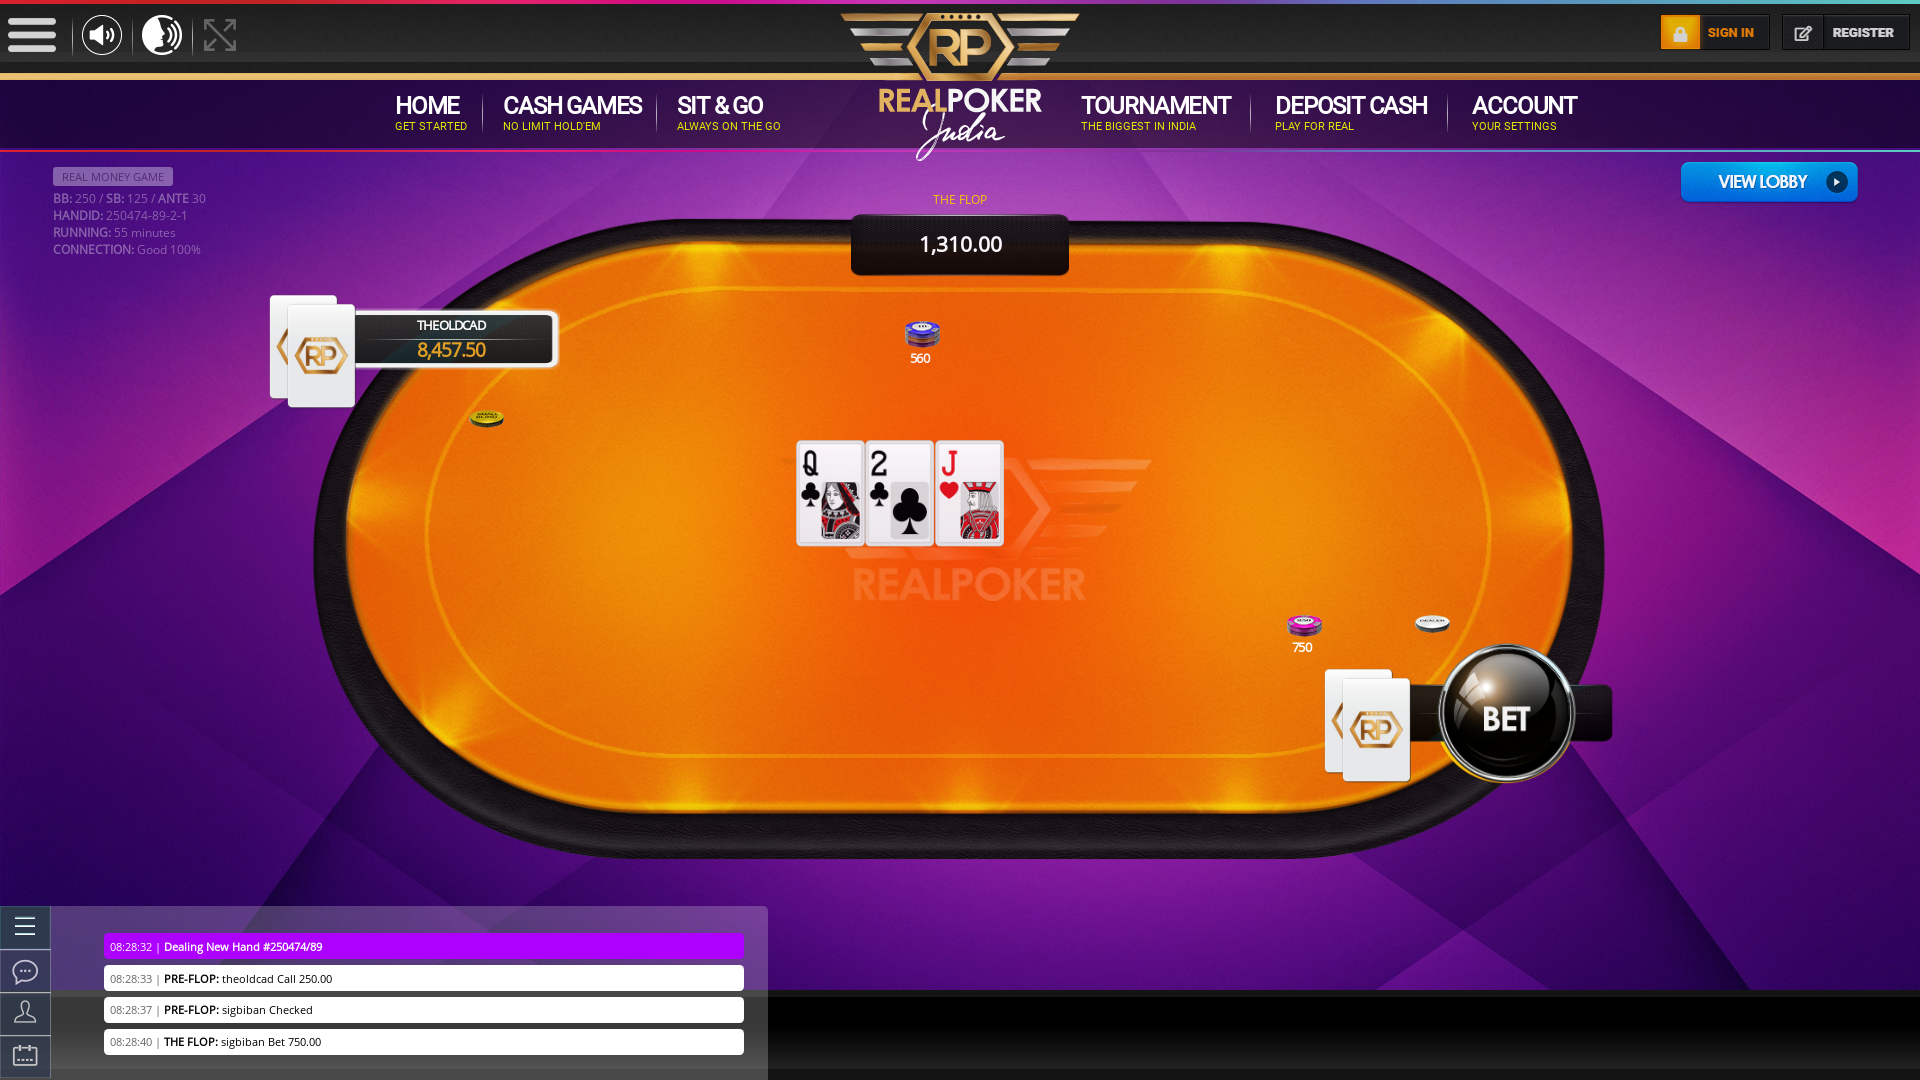 Indian poker on a 10 player table in the 54th minute